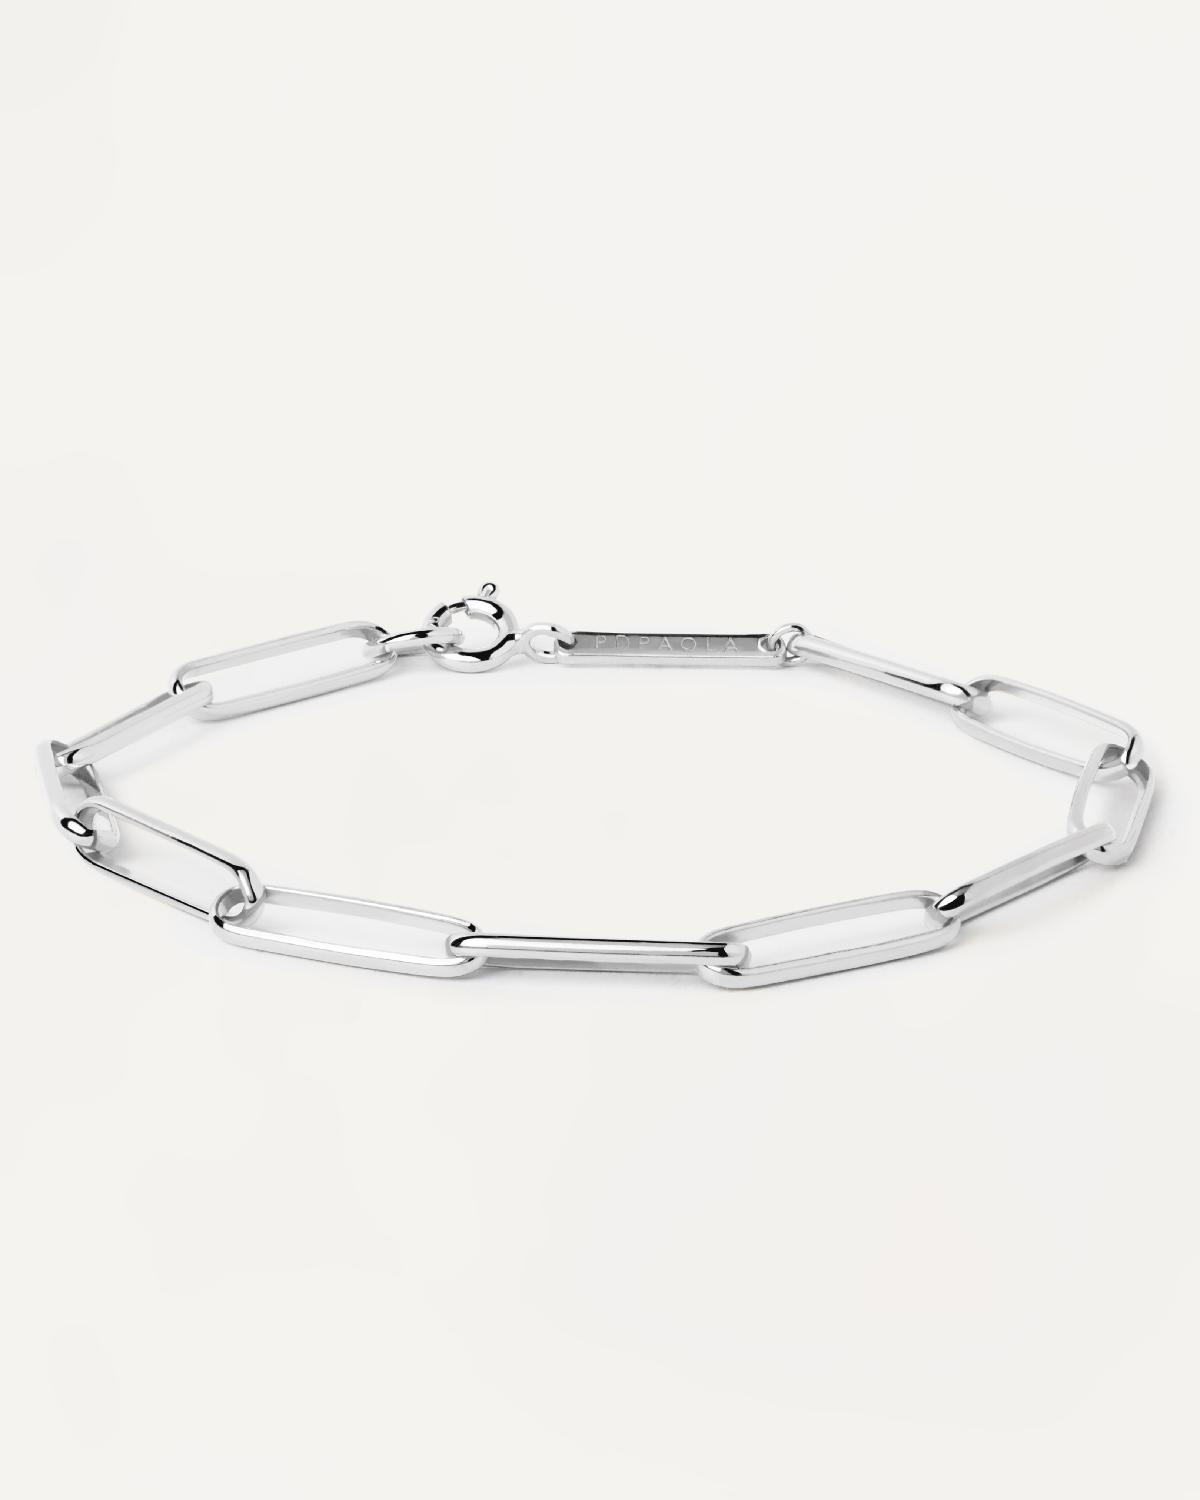 2023 Selection | Big Statement Chain Silver Bracelet. Statement chain bracelet in sterling silver with large links. Get the latest arrival from PDPAOLA. Place your order safely and get this Best Seller. Free Shipping.